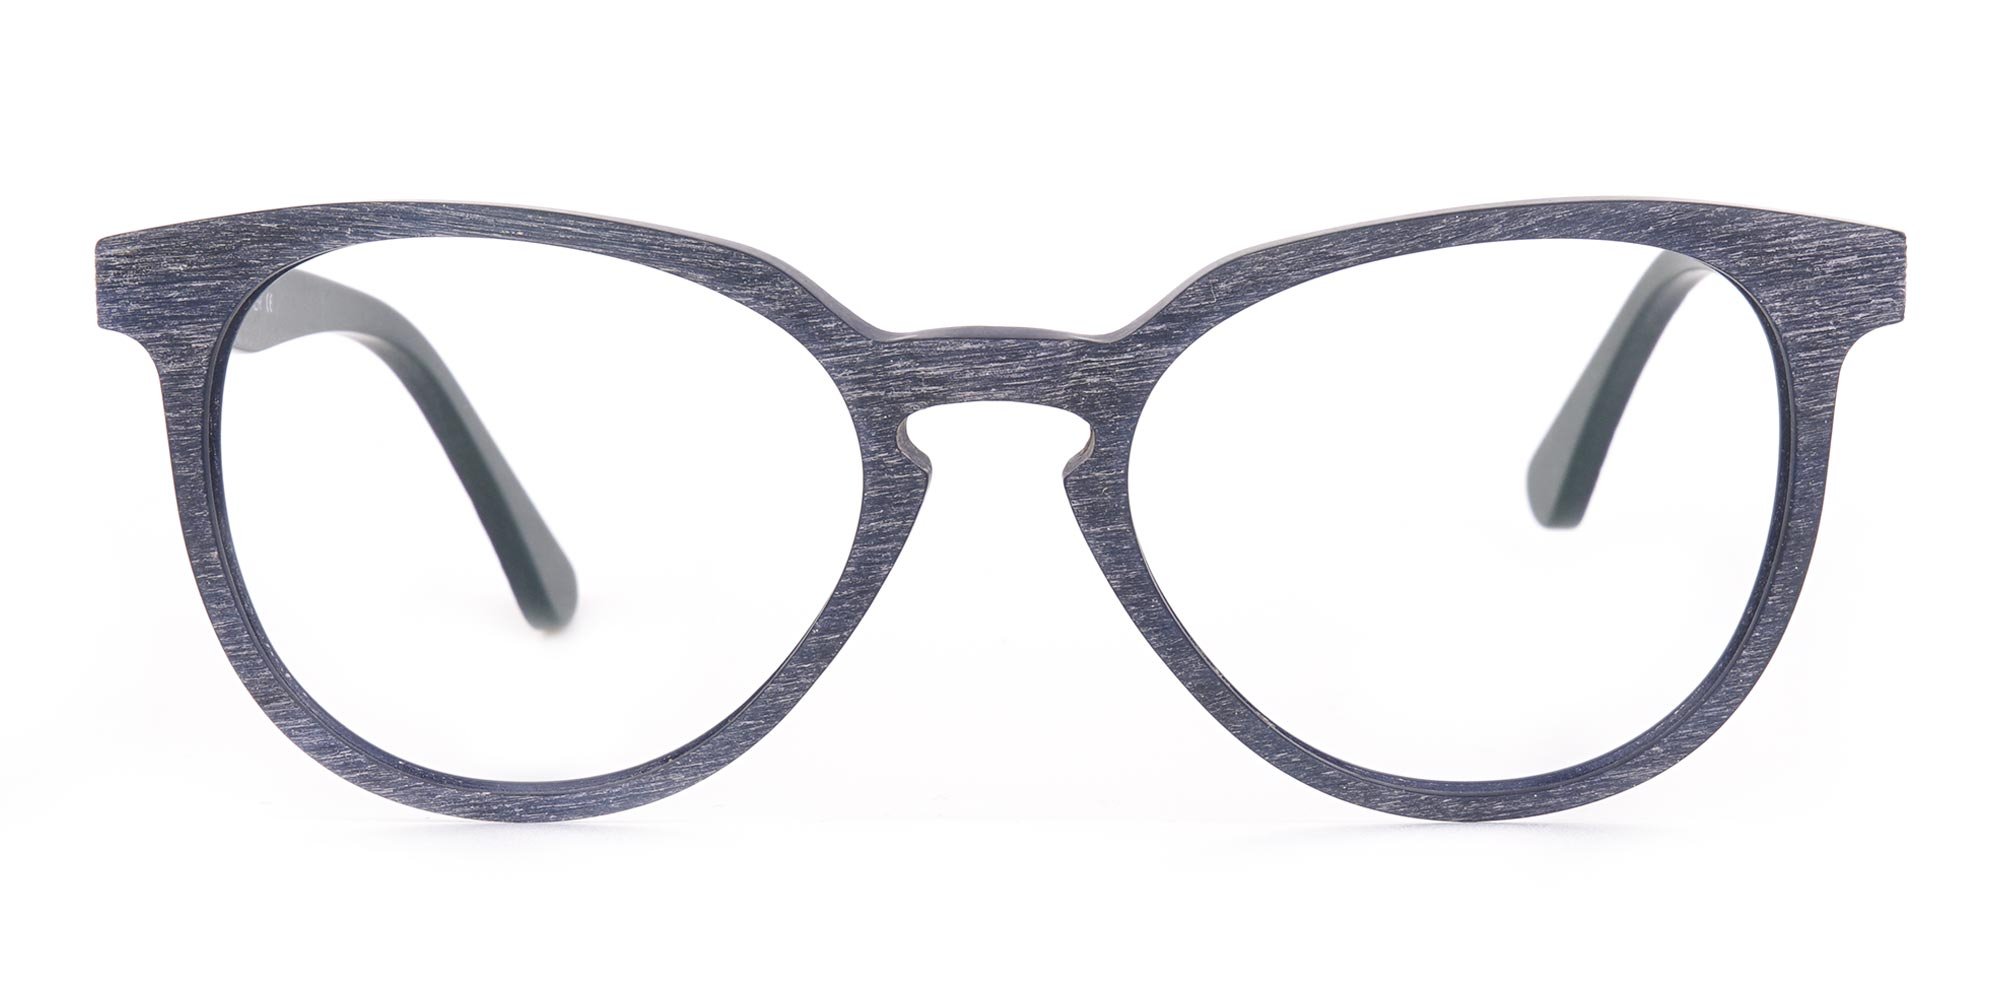 Dusty Green and Blue Wooden Glasses Frame